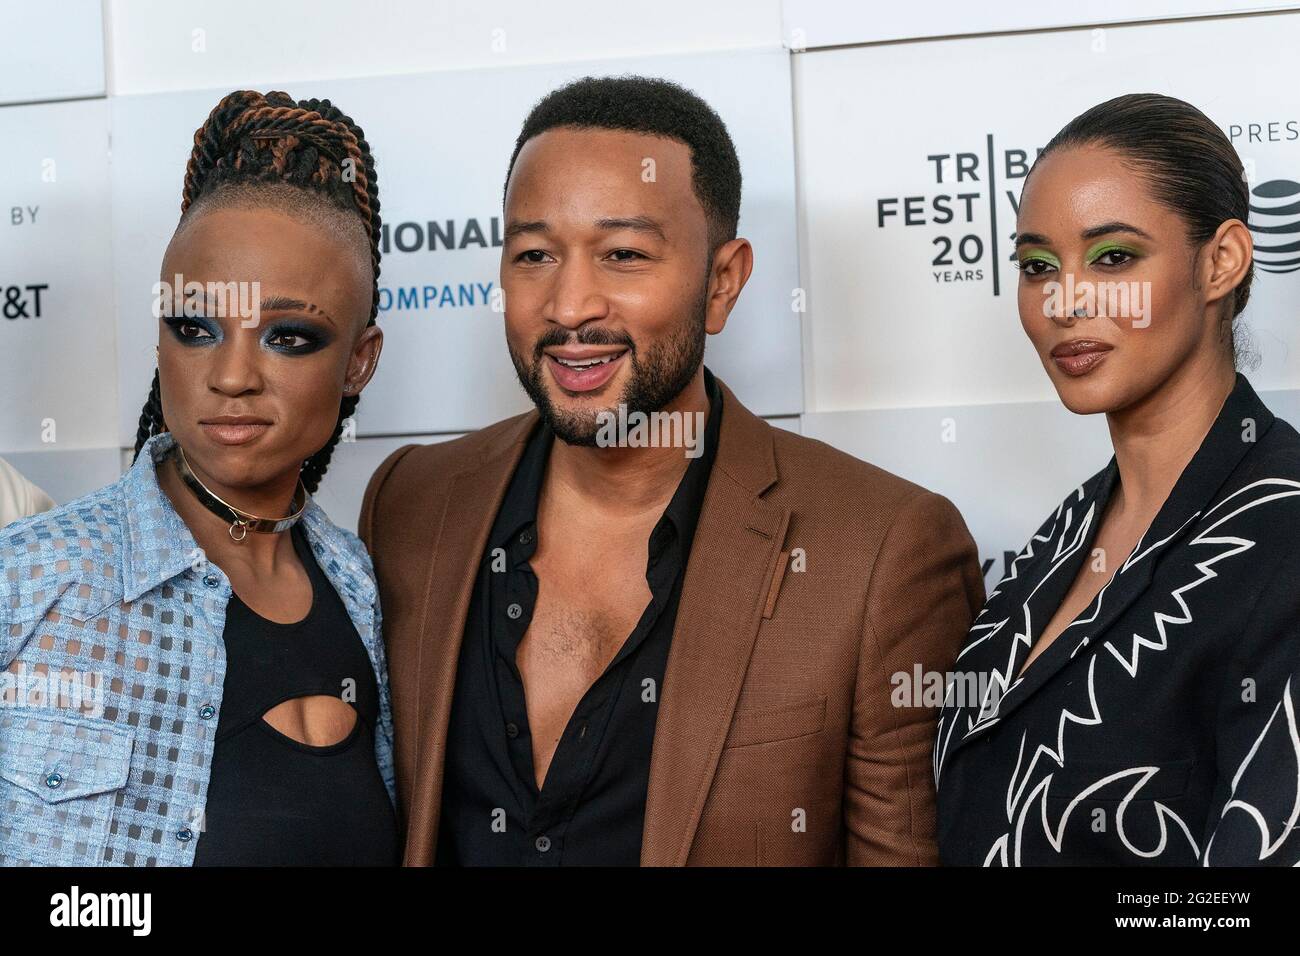 New York, United States. 10th June, 2021. Director Nneka Onuorah, producer John Legend director Giselle Bailey pose at The Legend of the Underground premiere at Tribeca Film Festival at Waterfront Plaza, Battery Park City (Photo by Lev Radin/Pacific Press) Credit: Pacific Press Media Production Corp./Alamy Live News Stock Photo